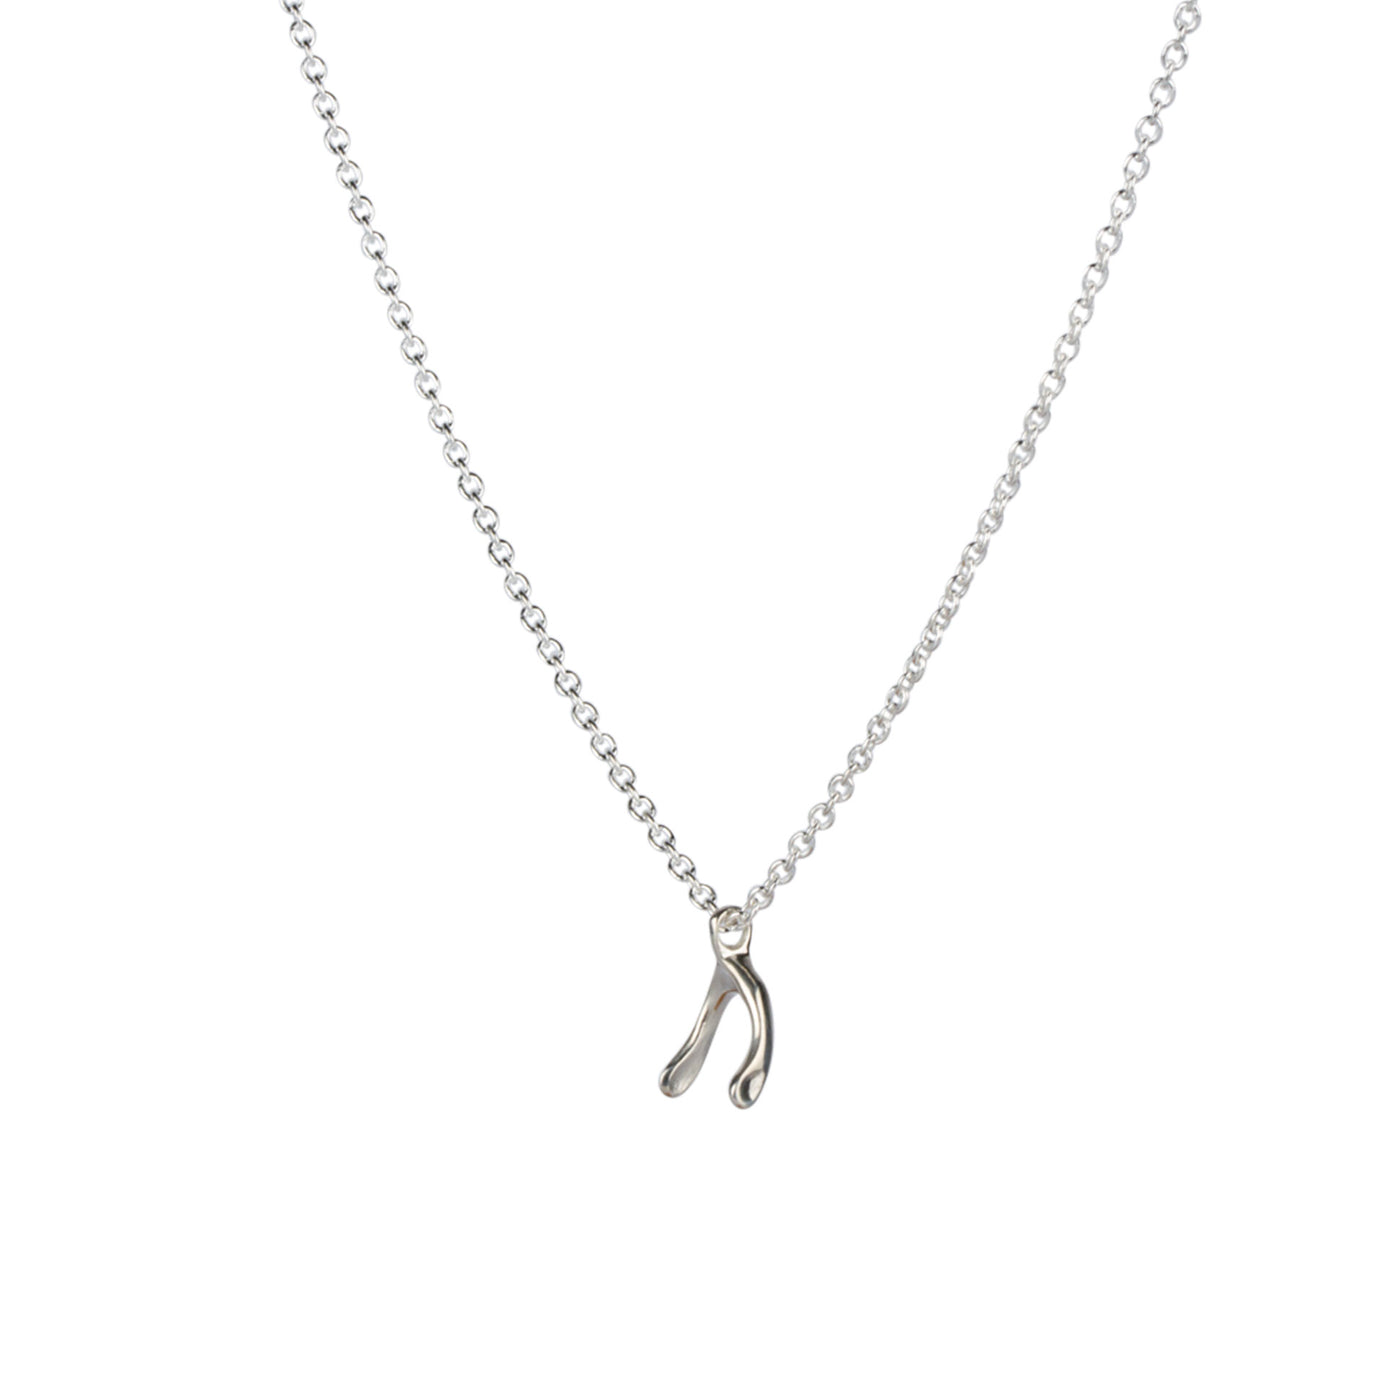 Silver Wishbone Necklace by Corey Egan Side view on a white background